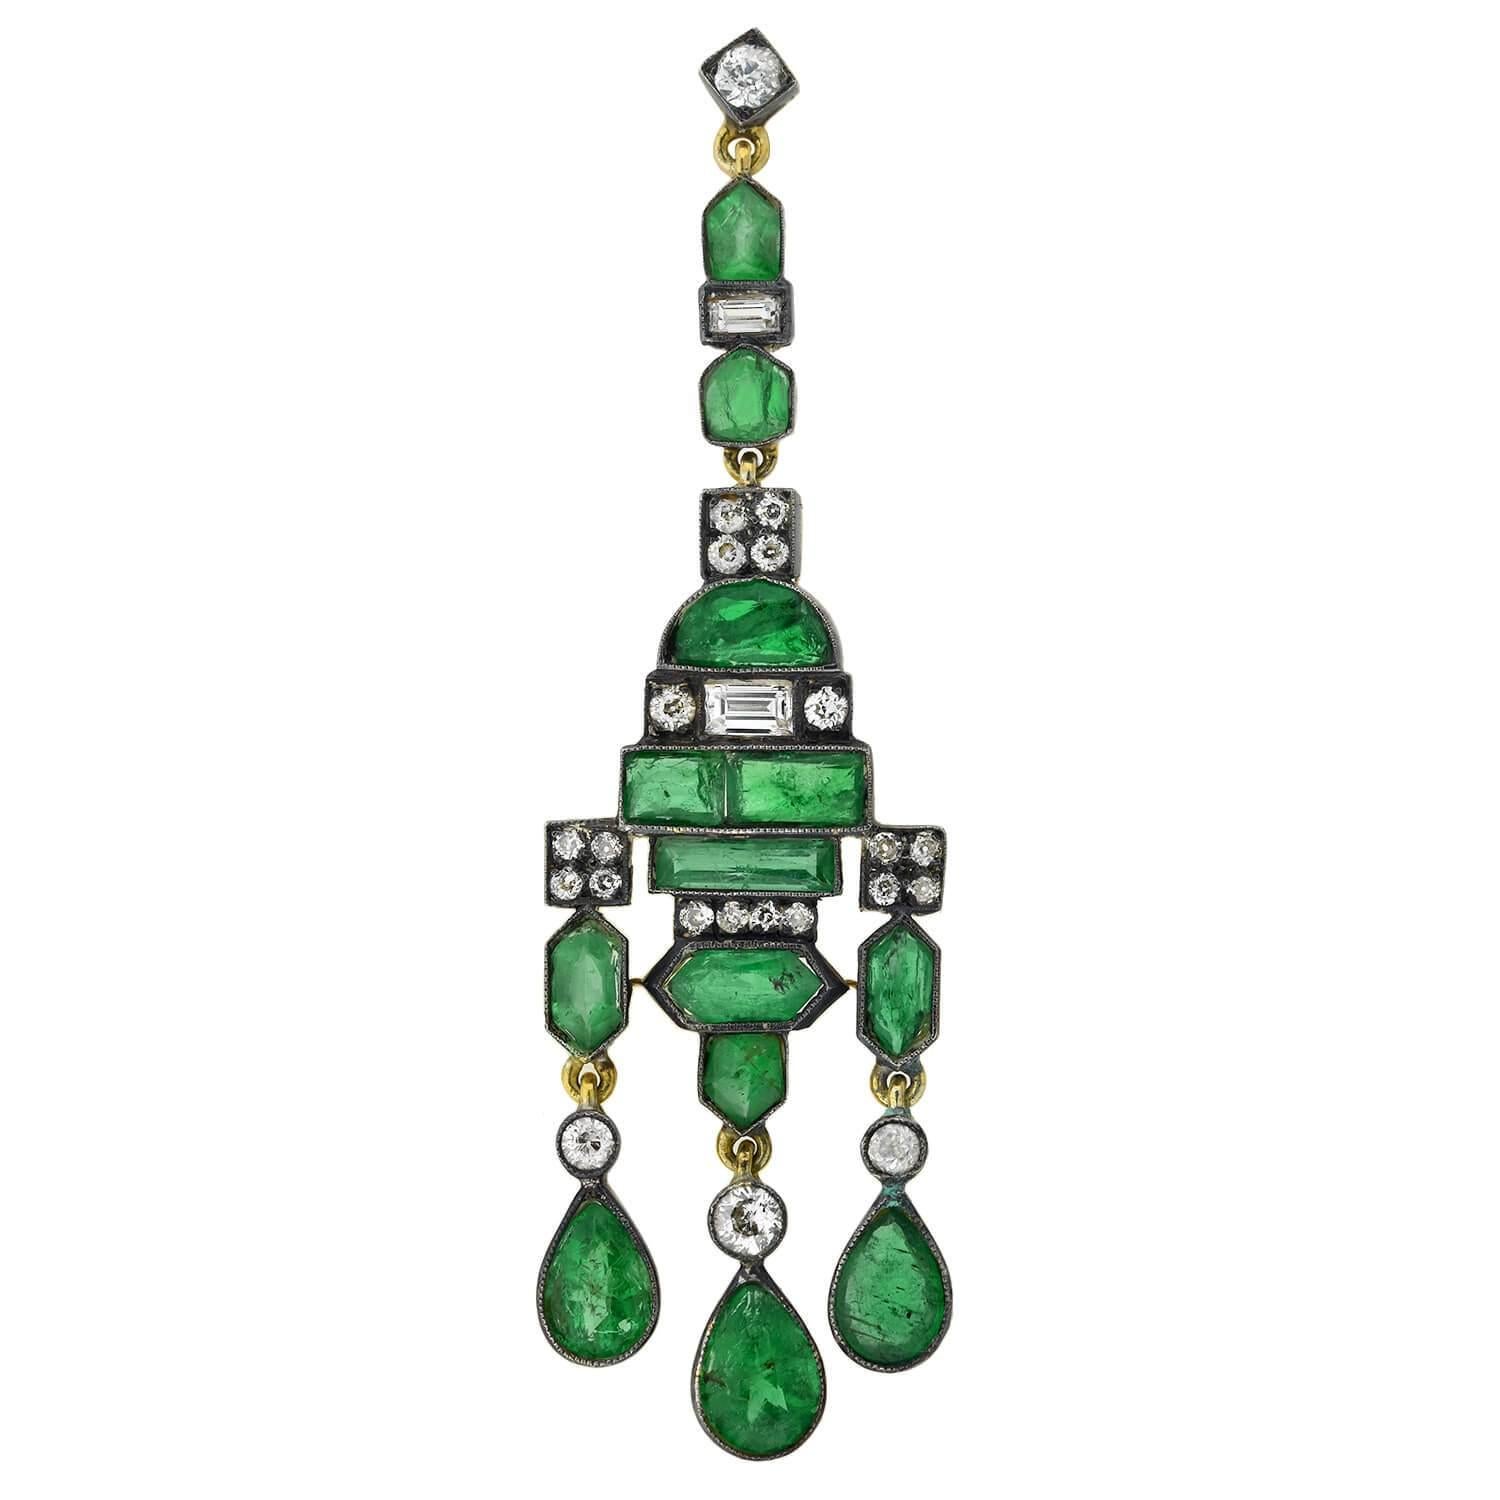 An exquisite pair of gemstone chandelier earrings from the Edwardian (ca1910s) era! Crafted in 14kt yellow gold topped in sterling silver, these incredible earrings are adorned with sparkling diamonds and vibrant emeralds. Each earring displays a